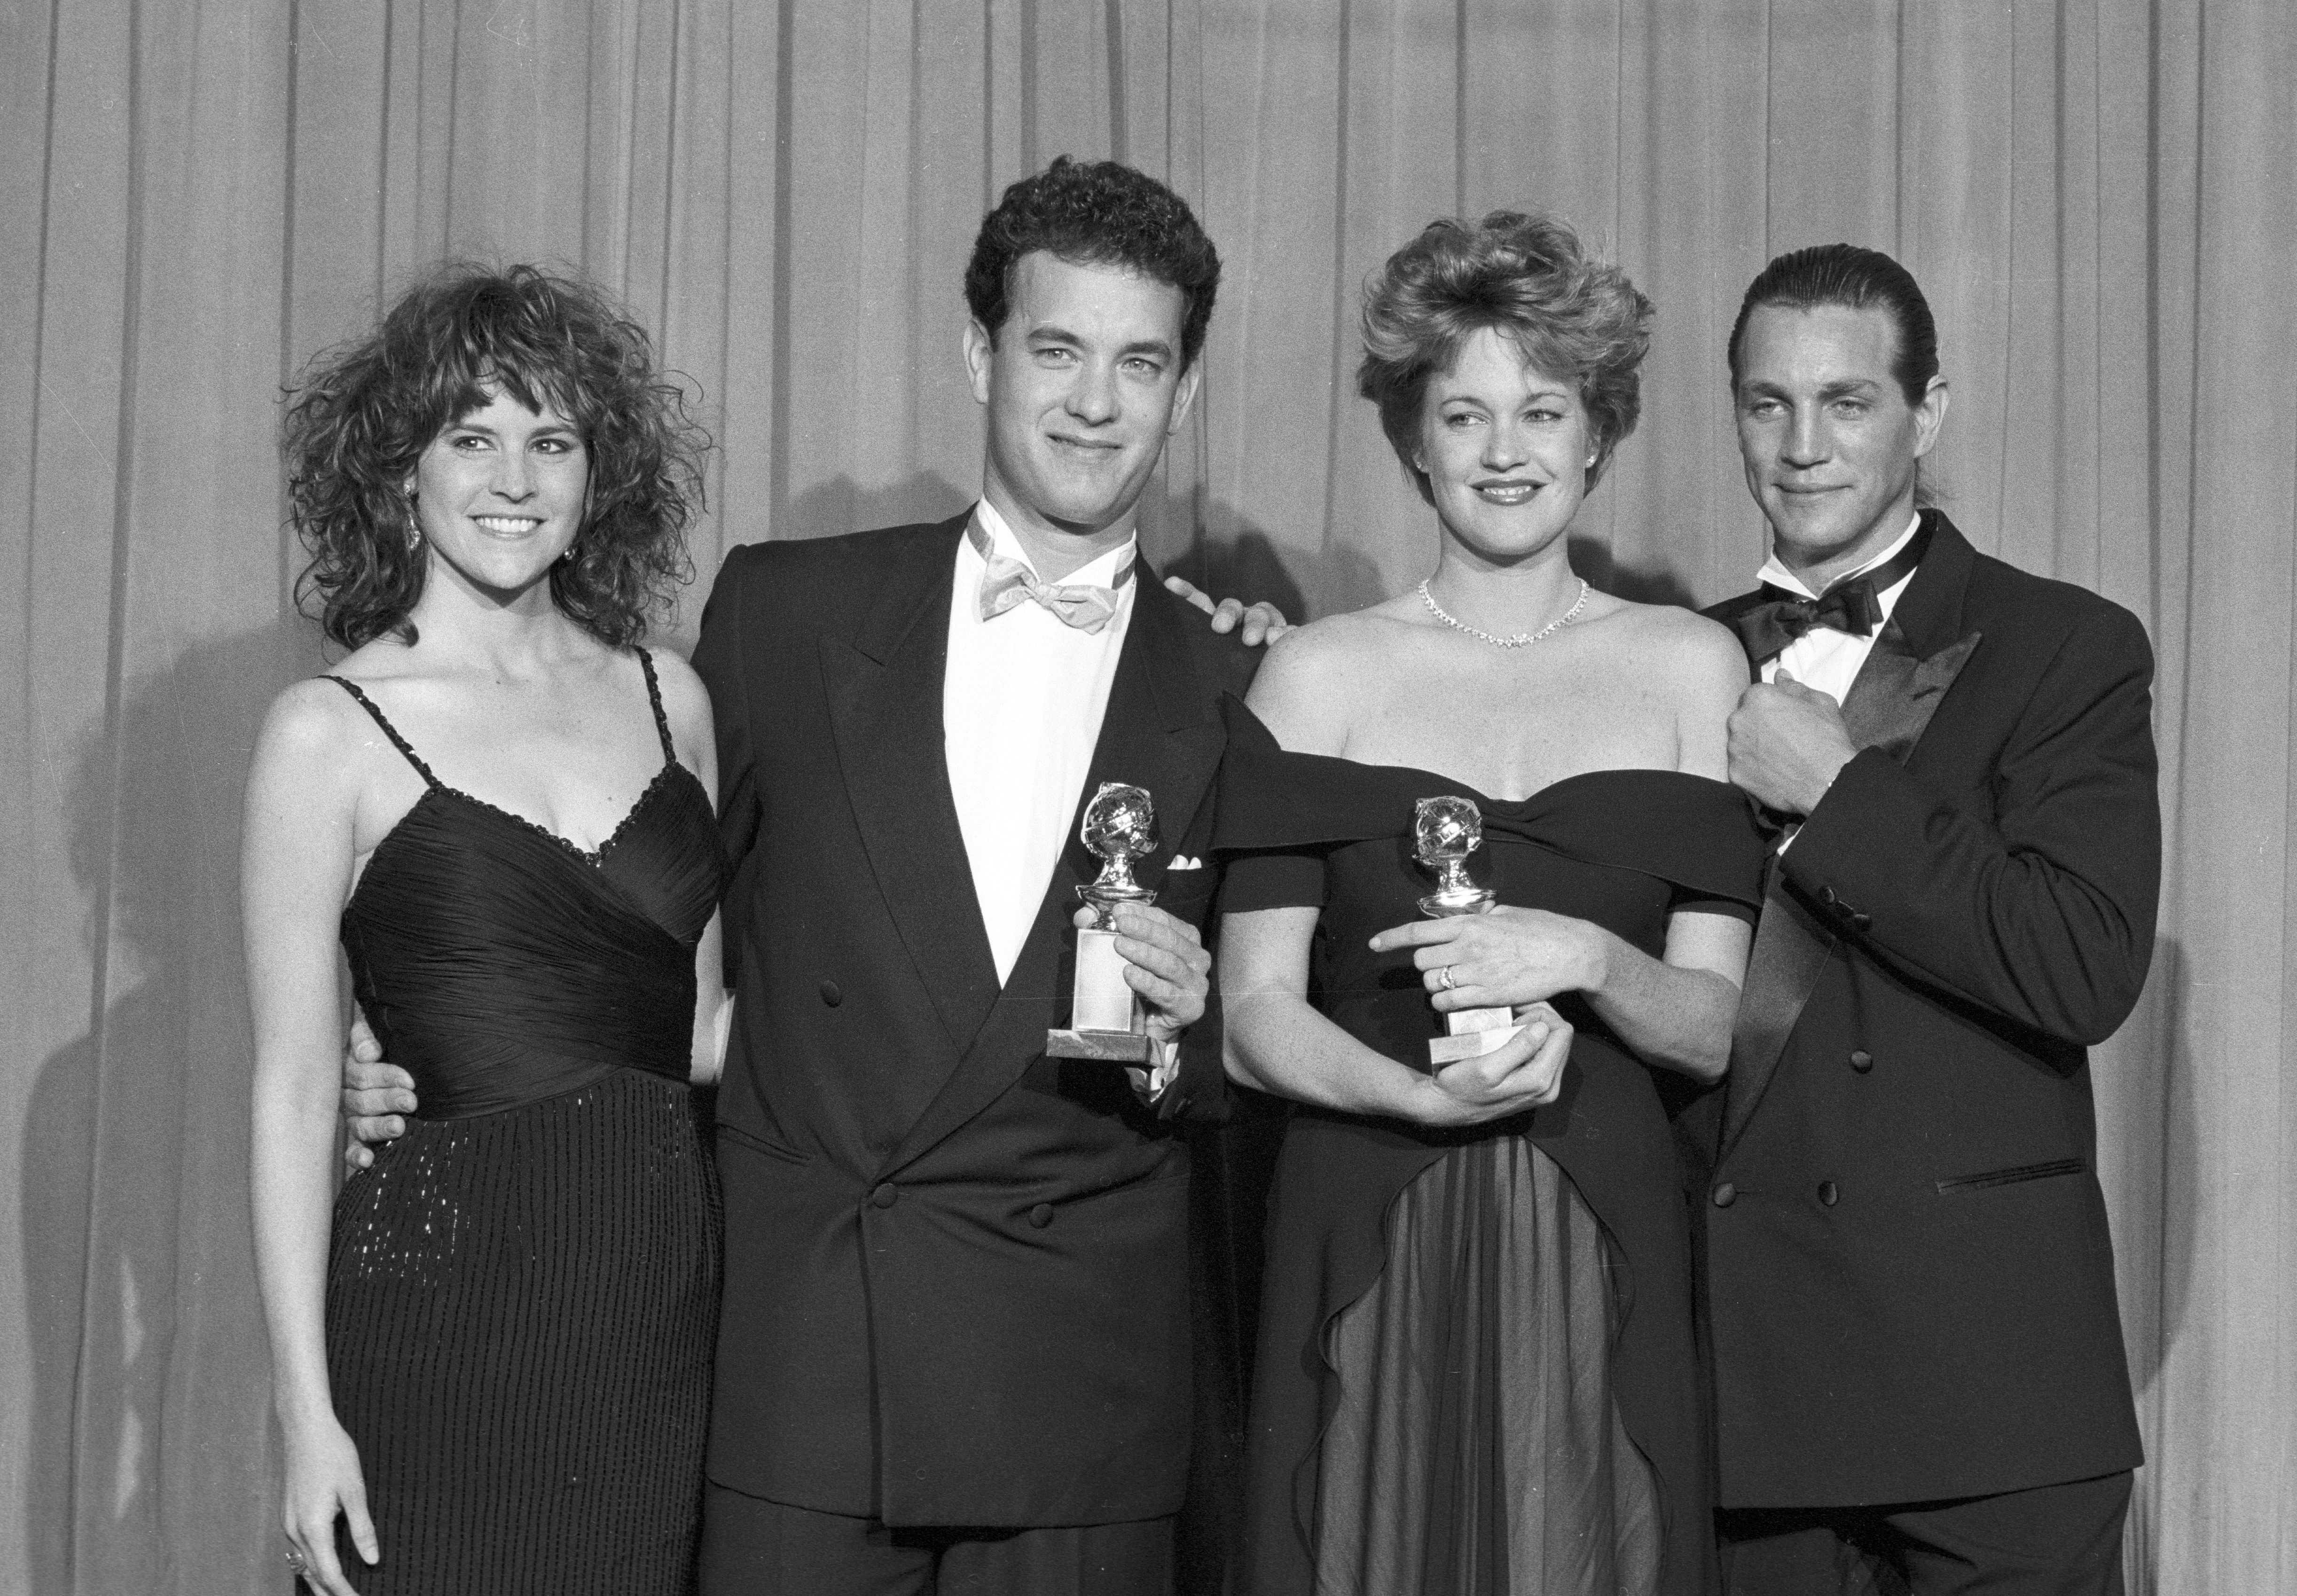 1989_gg46_tom_hanks_melanie_griffith_best_actor_actress_comedy-big_working_girl_ally_sheedy_eric_roberts_ng_0